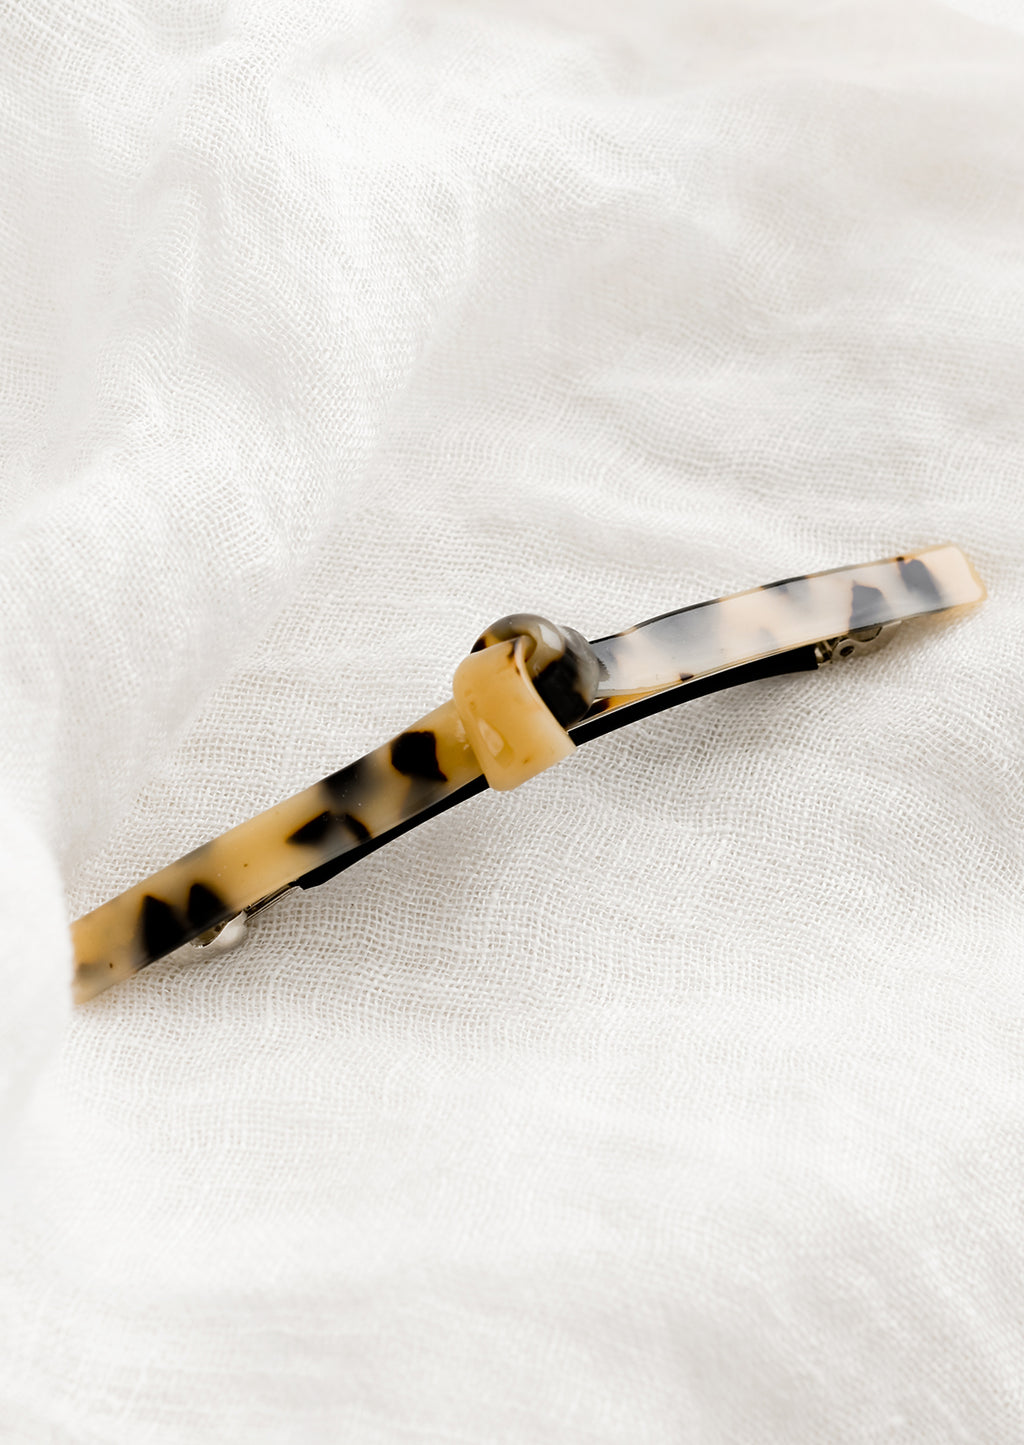 Blonde Tortoise: Acetate barrette with knot detail in tortoise